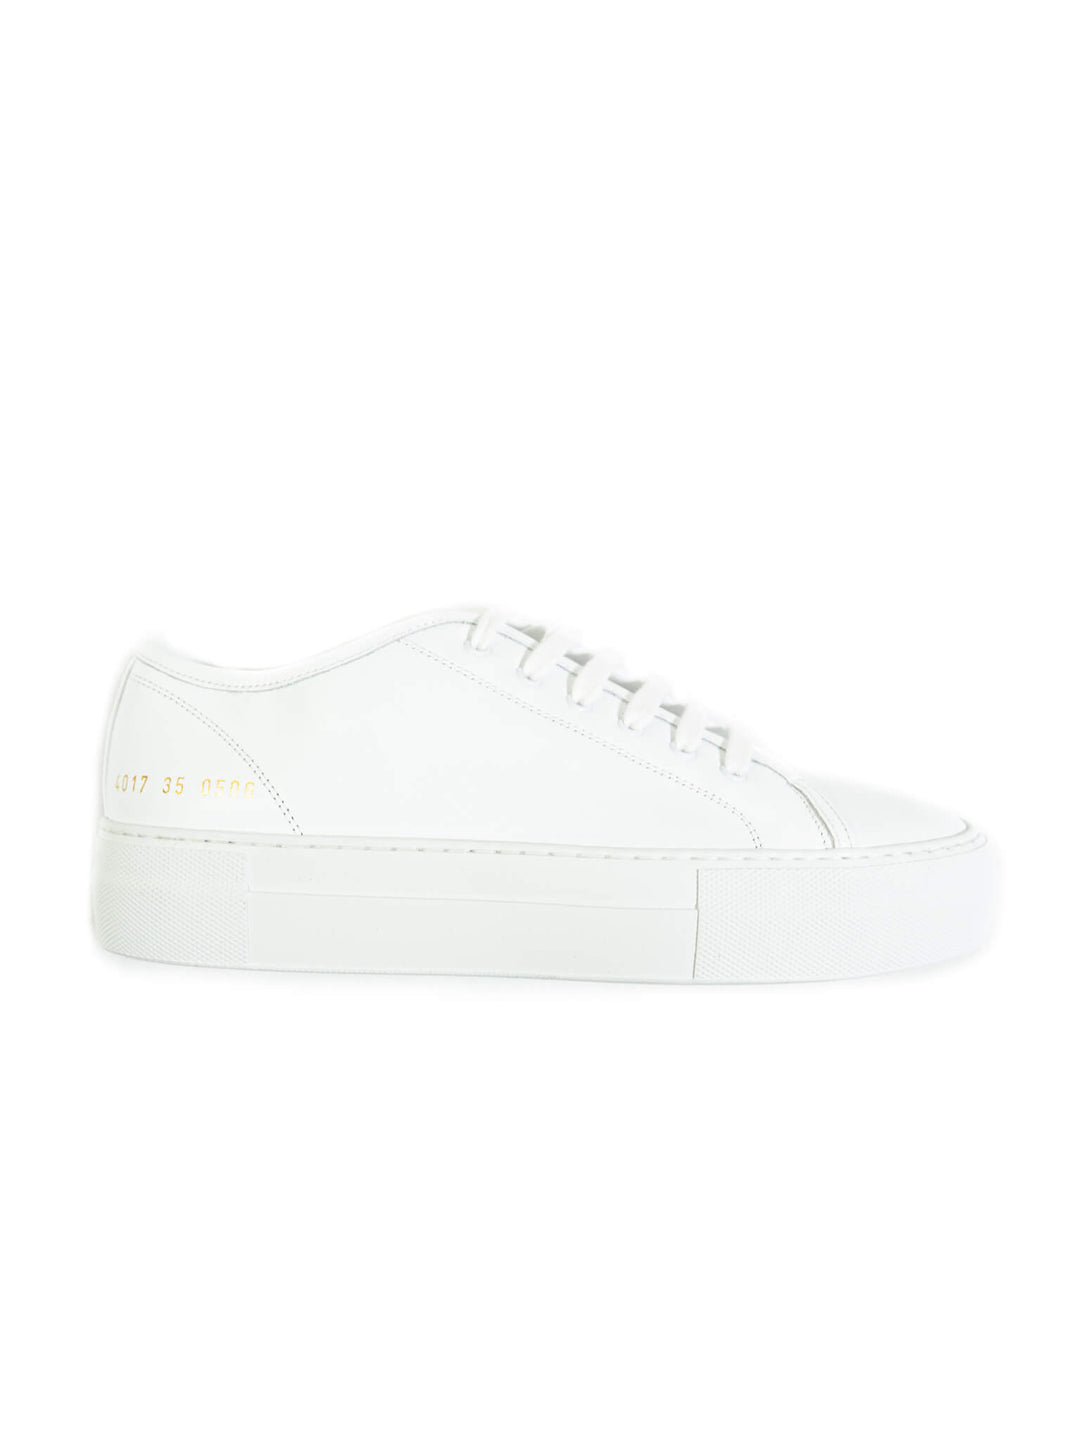 COMMON PROJECTS TOURNAMENT LEATHER SNEAKER - WHITE